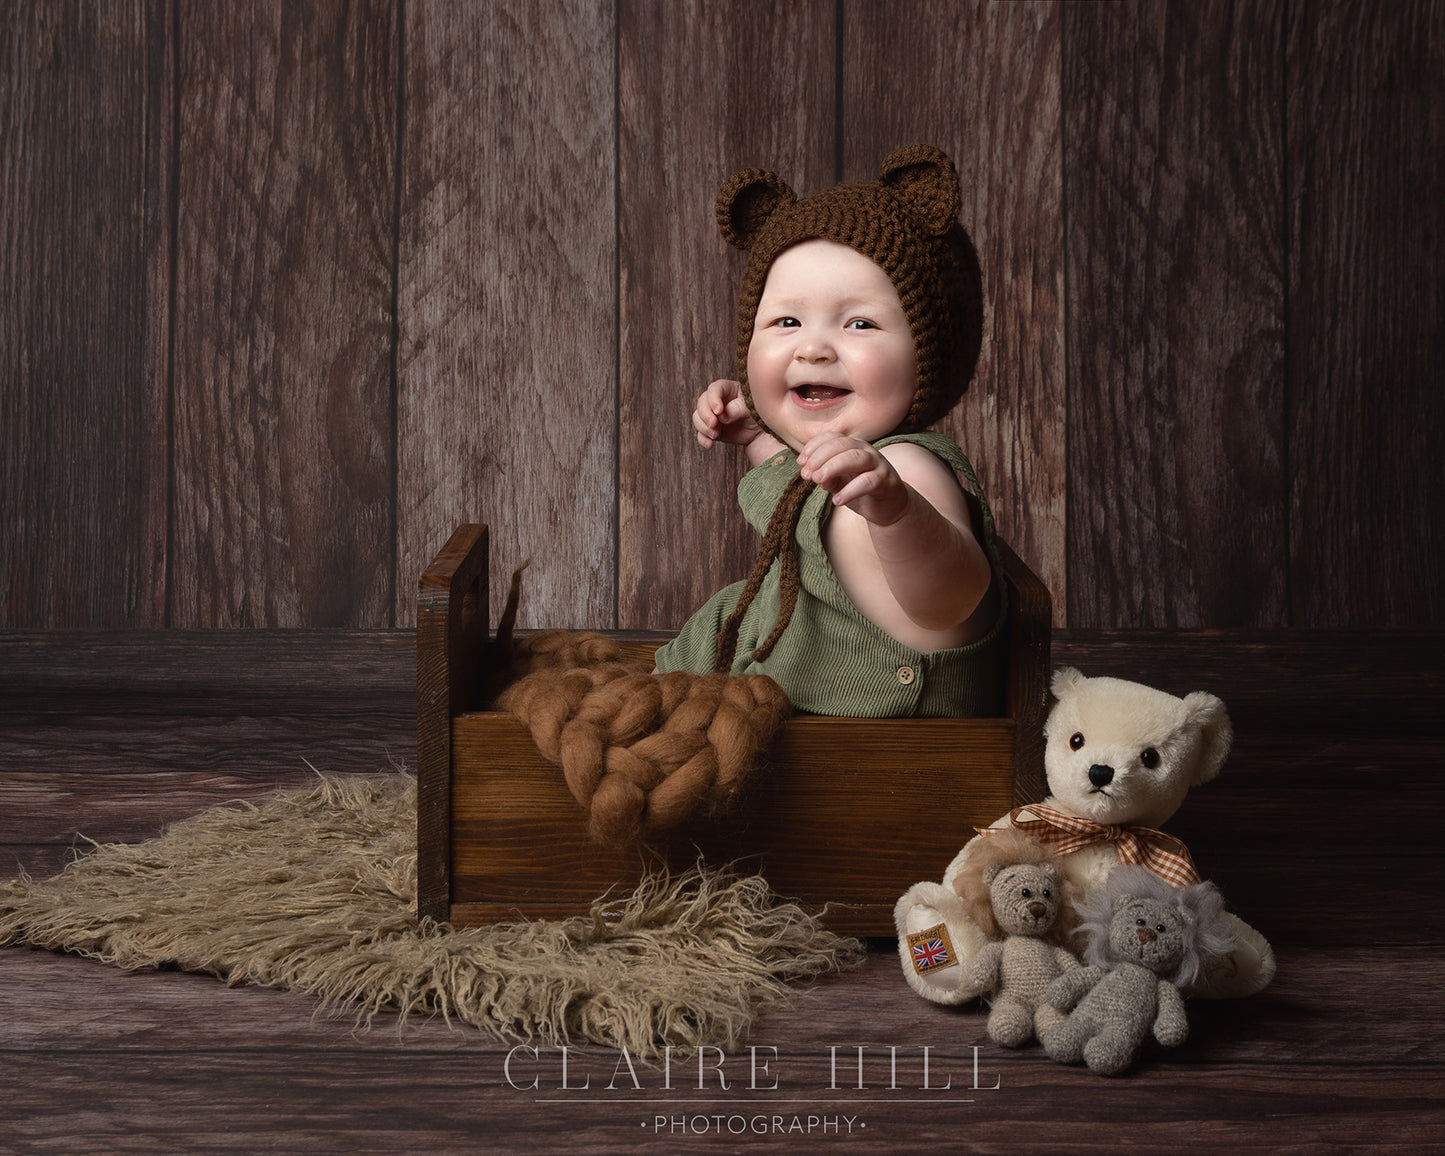 Professional sitter photography photos by Claire Hill Photography. Studio based in Perton Wolverhampton West Midlands Birmingham and Shropshire book today